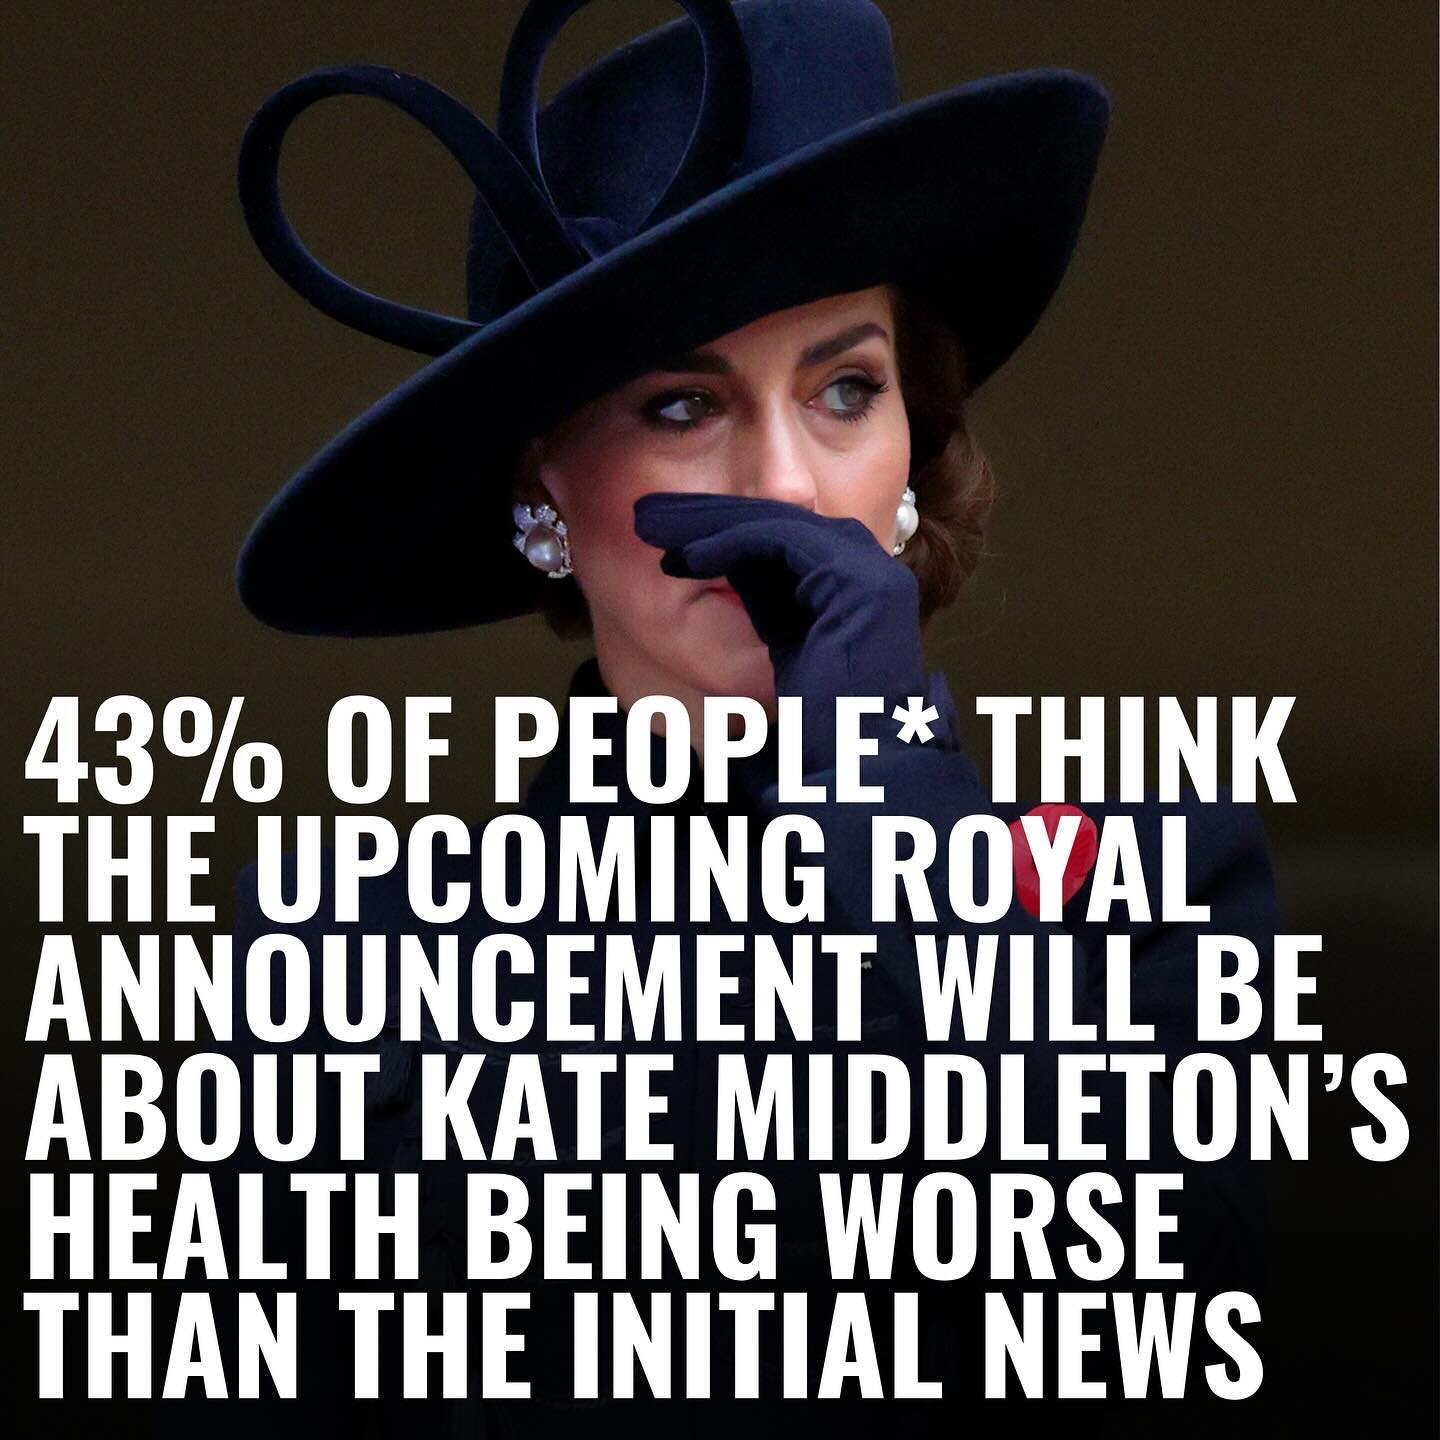 After the news broke out about BBC being asked to be on standby for a Royal Announcement, Twitter (X) has gone wild with conspiring what it will be about. Our office was buzzing with theories so naturally we had to send a survey. While almost half of